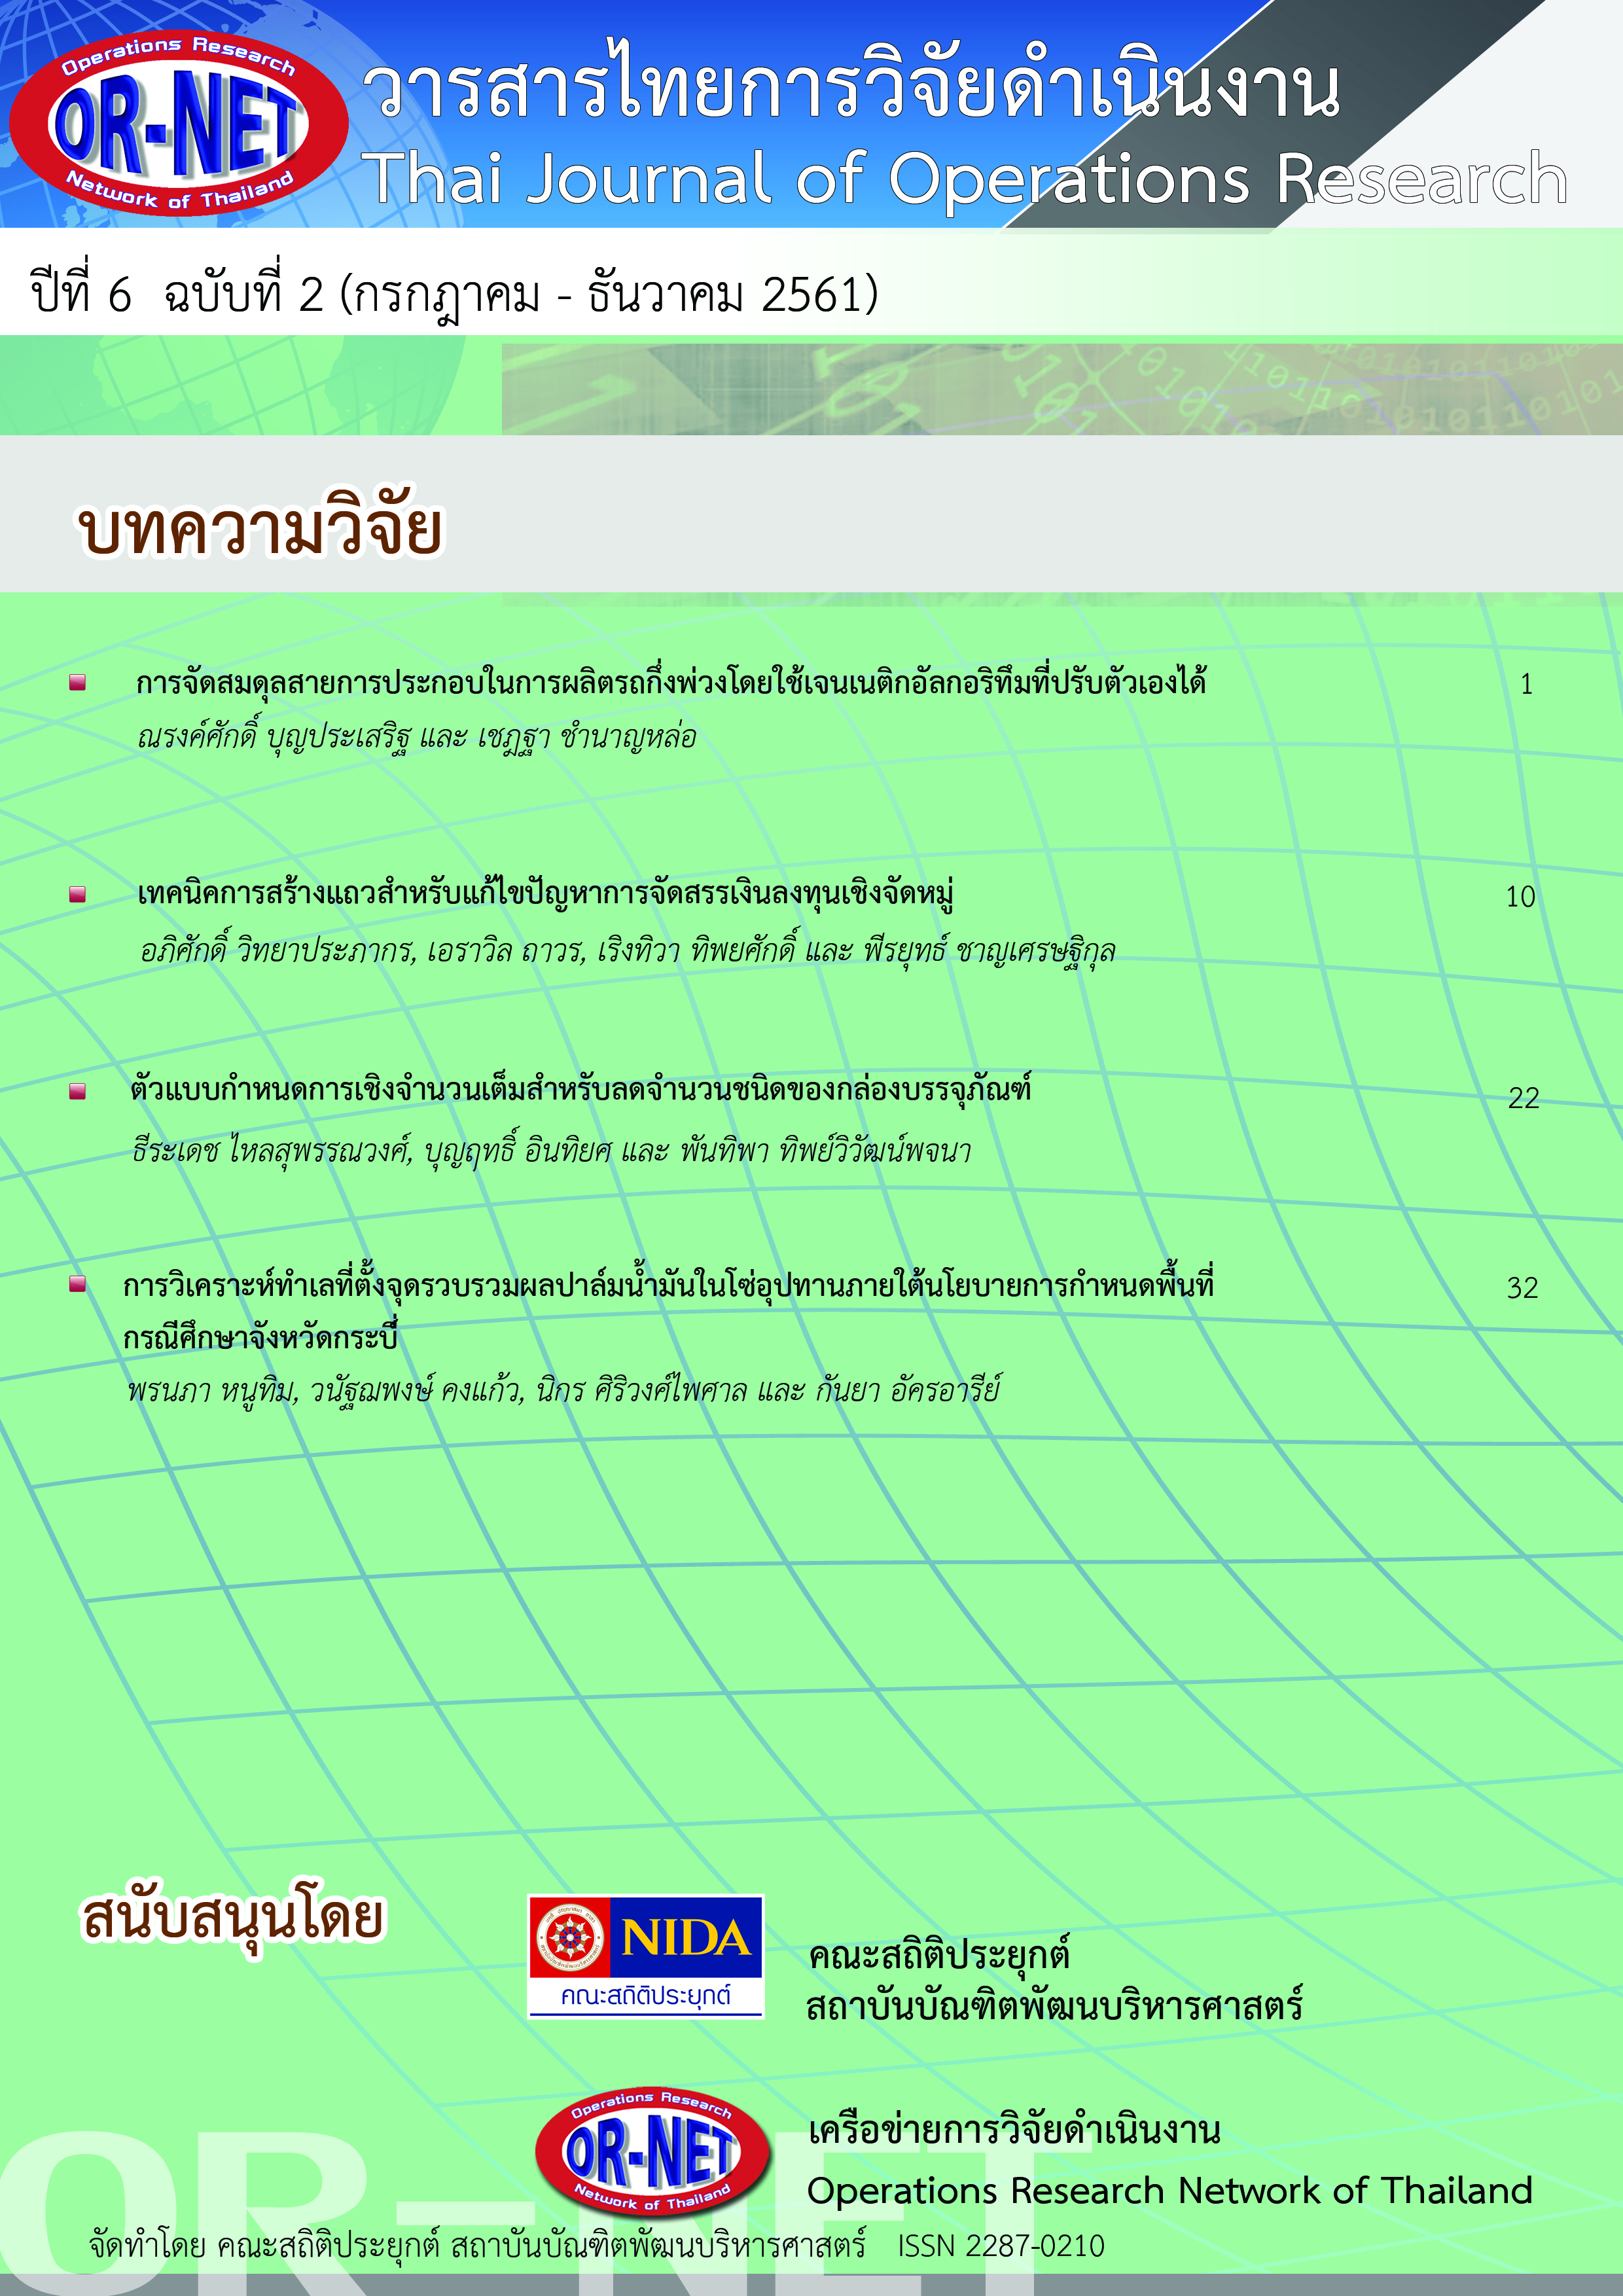 					View Vol. 6 No. 2 (2018): Thai Journal of Operations Research: TJOR Vol 6 No 2 July - December 2018
				